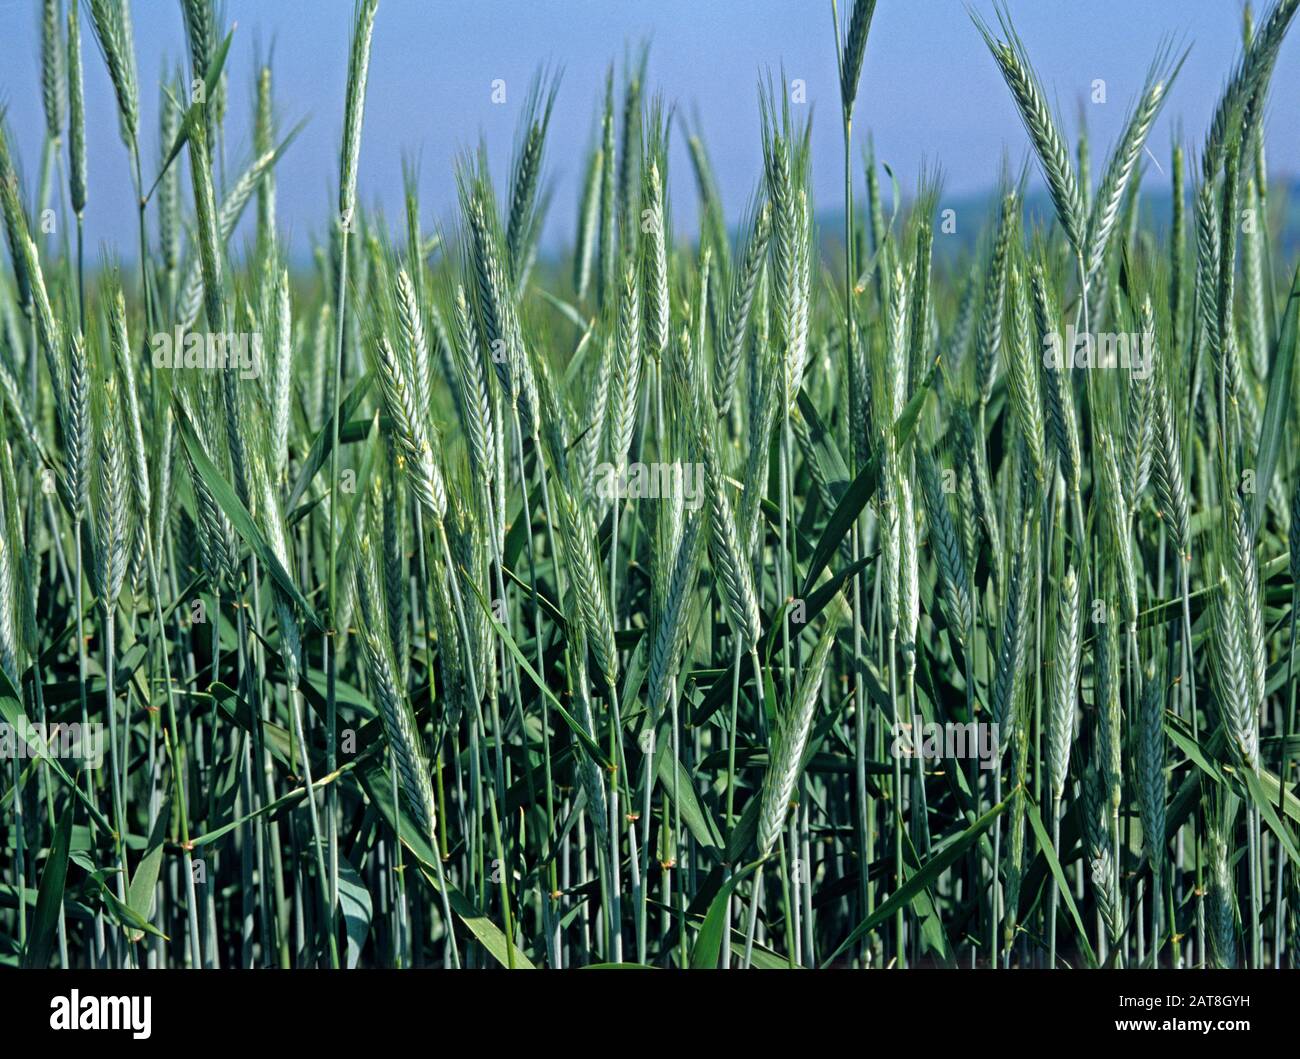 Triticale variety Salvo, a hybrid crop of wheat and rye used for animal feed, healthy crop in leaf and greenon a fine day, Wiltshire, July Stock Photo